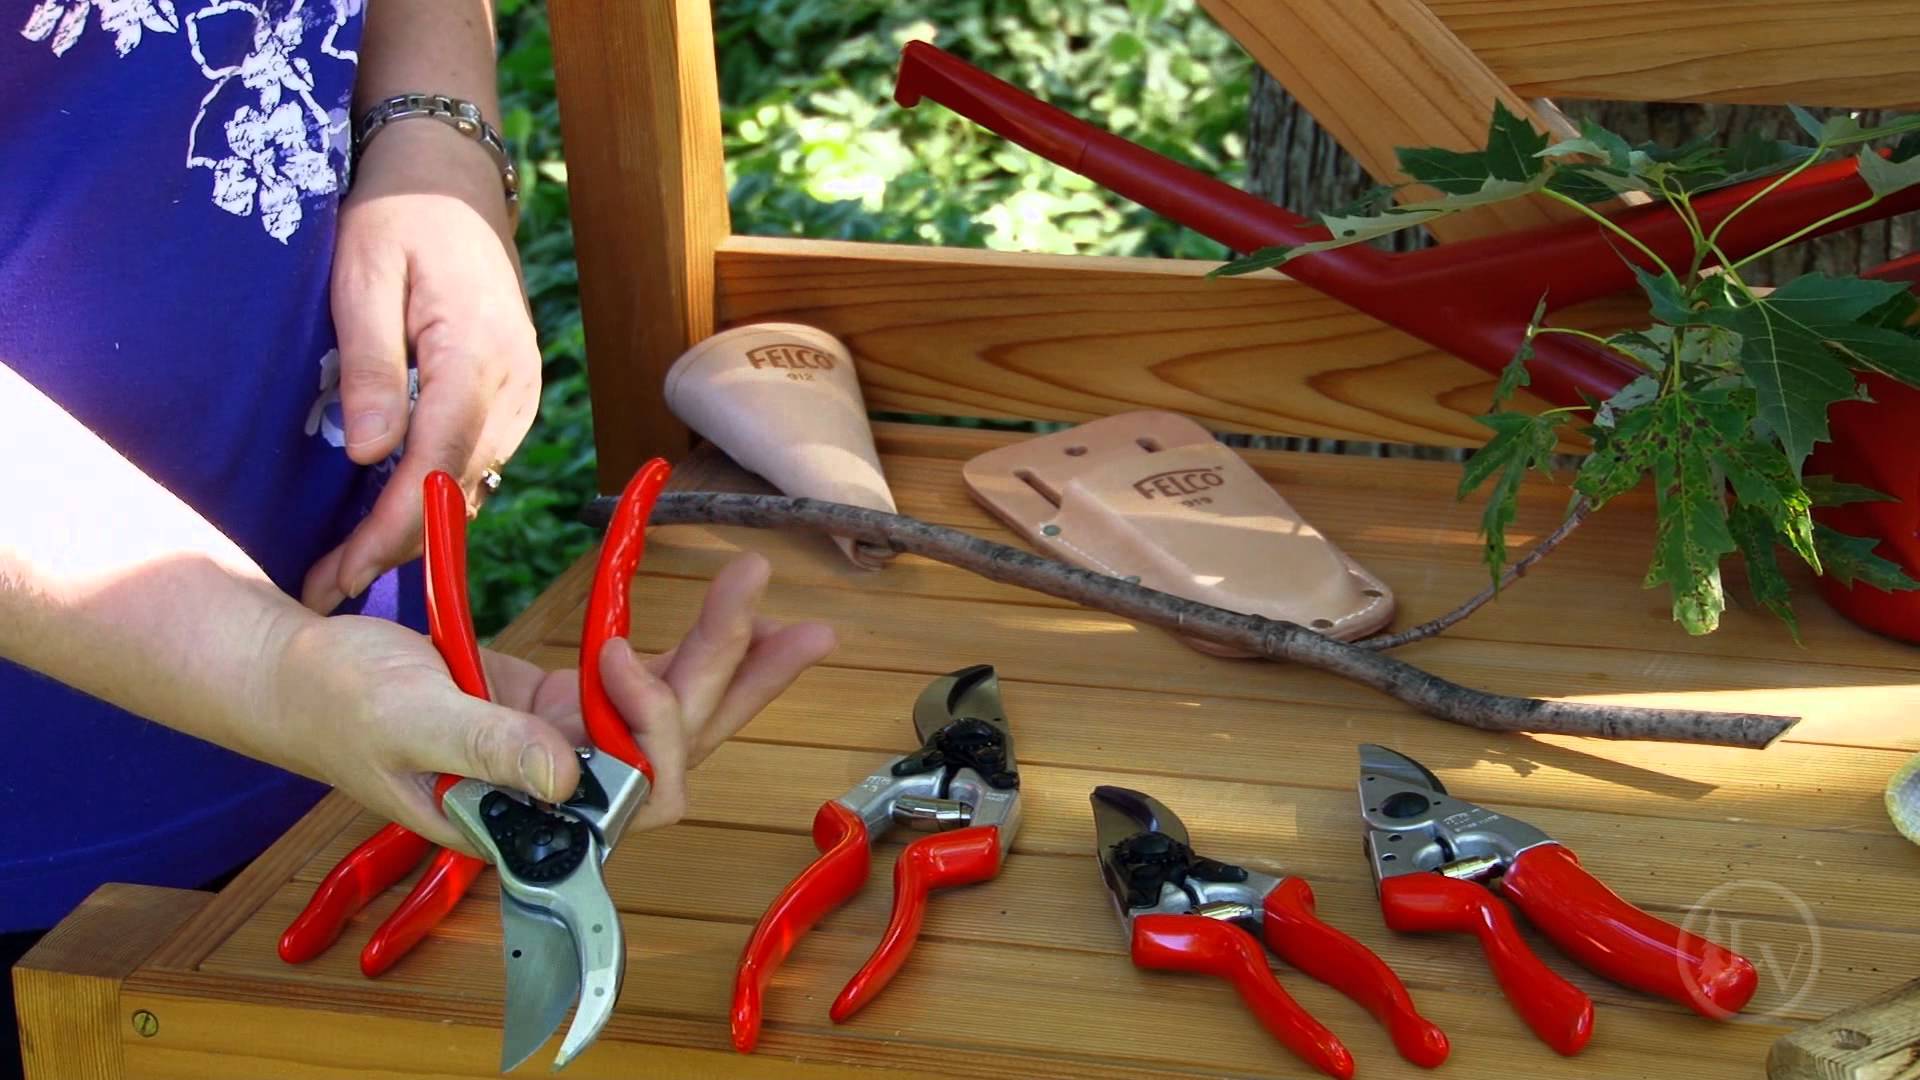 Best Selling Hand Pruning Shears - Reviews...